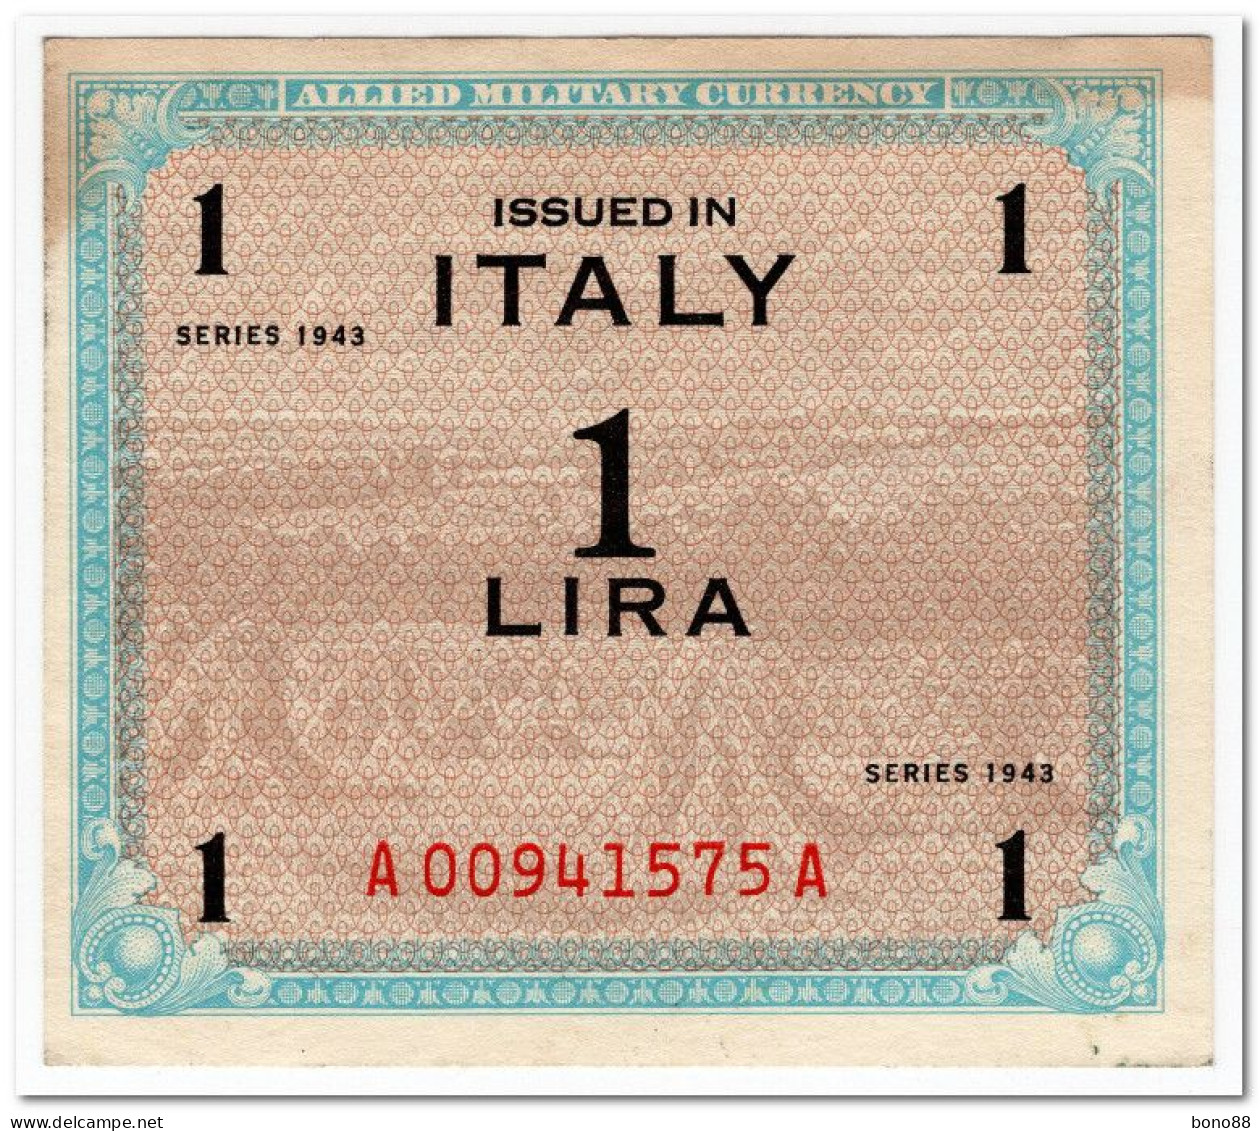 ITALY,MILITARY CURRENCY,1943,P.M10,VF-XF - Occupation Alliés Seconde Guerre Mondiale